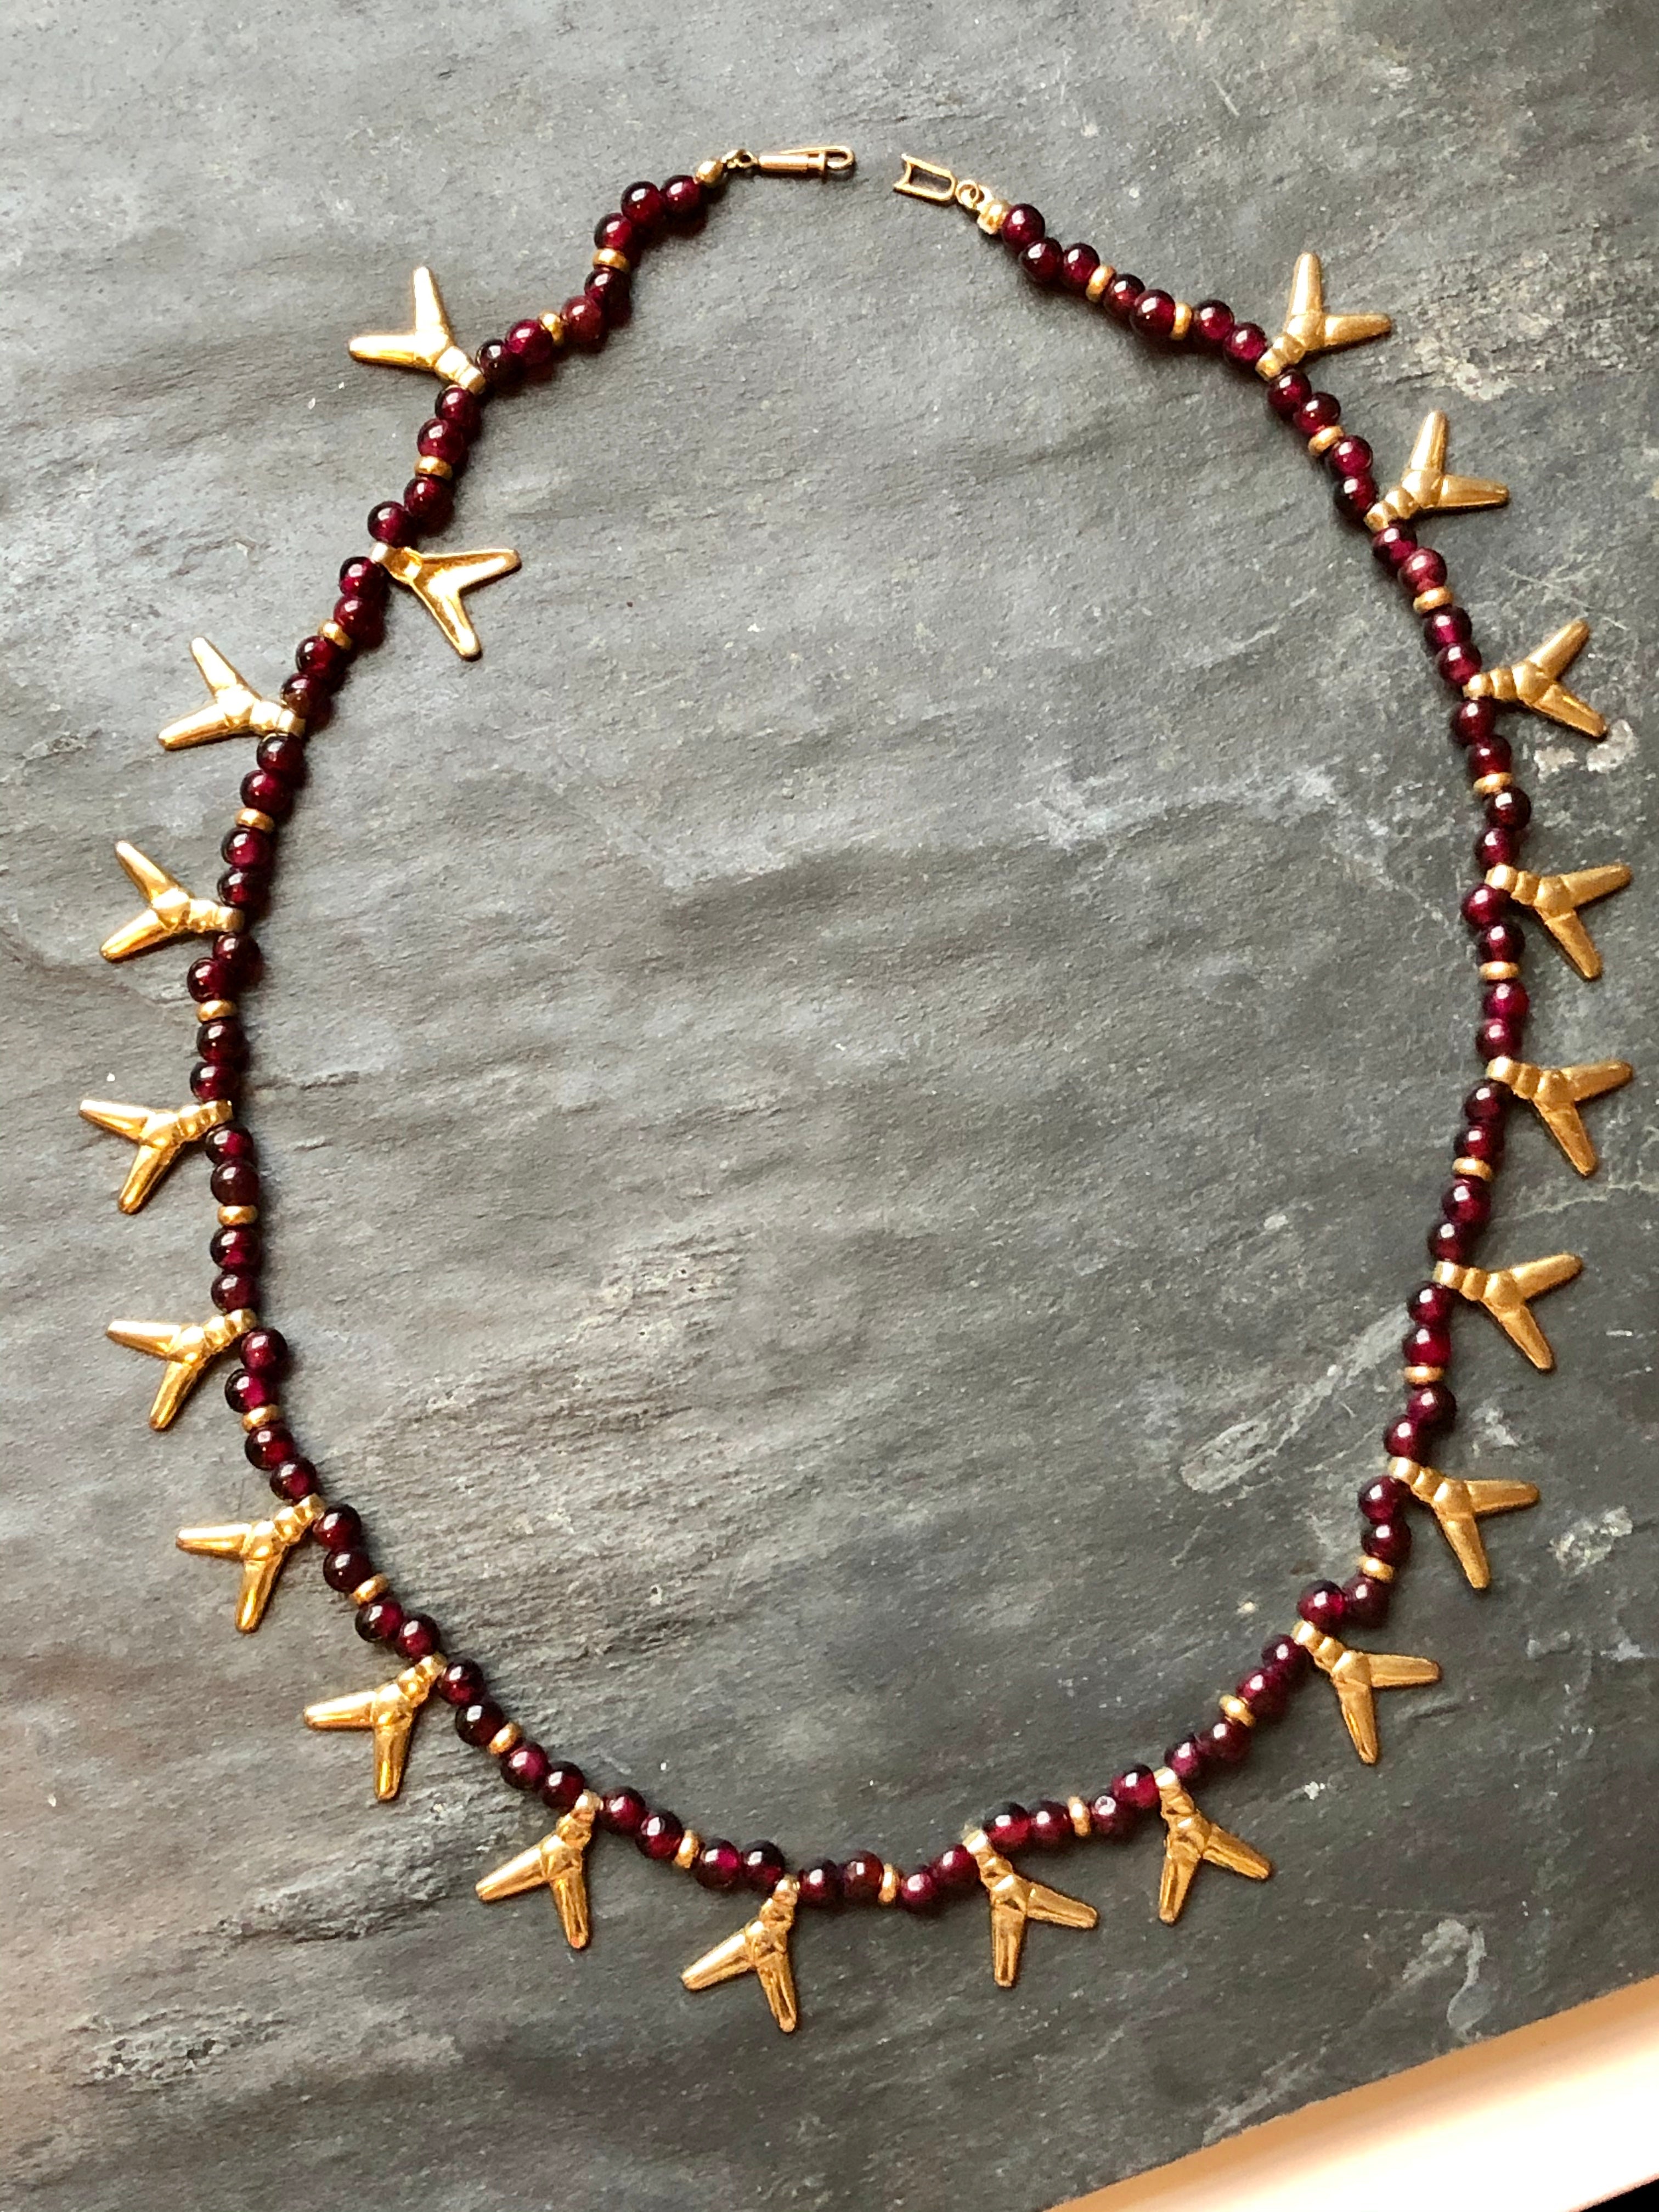 Vintage Mulberry Garnet Beads & Charm Necklace